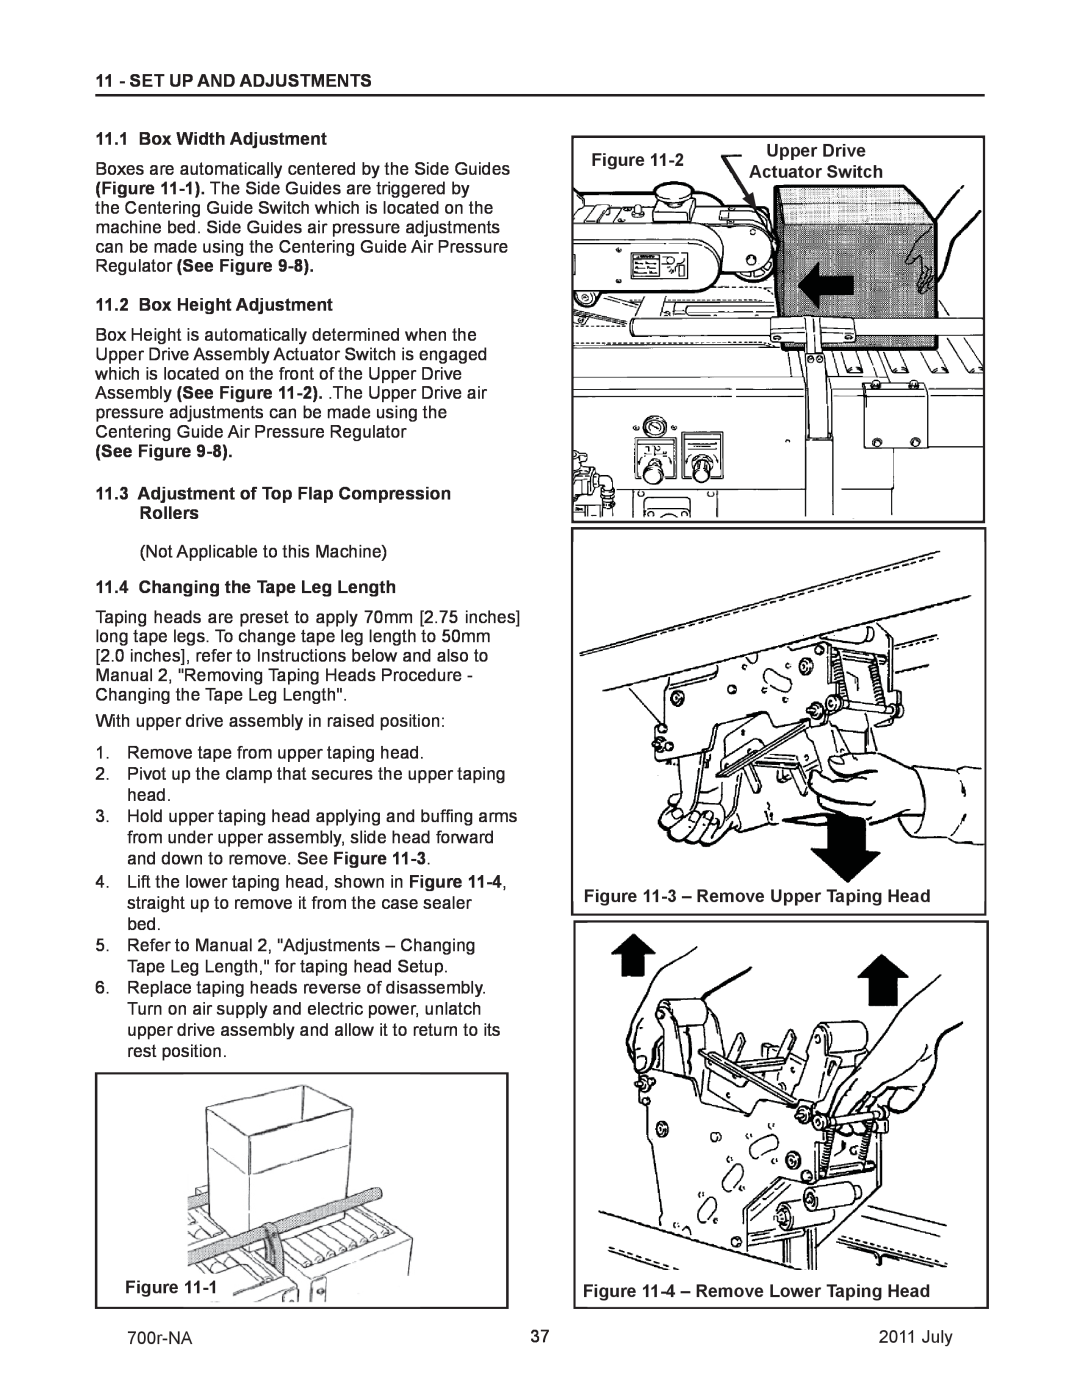 3M 40800 operating instructions Set Up And Adjustments 